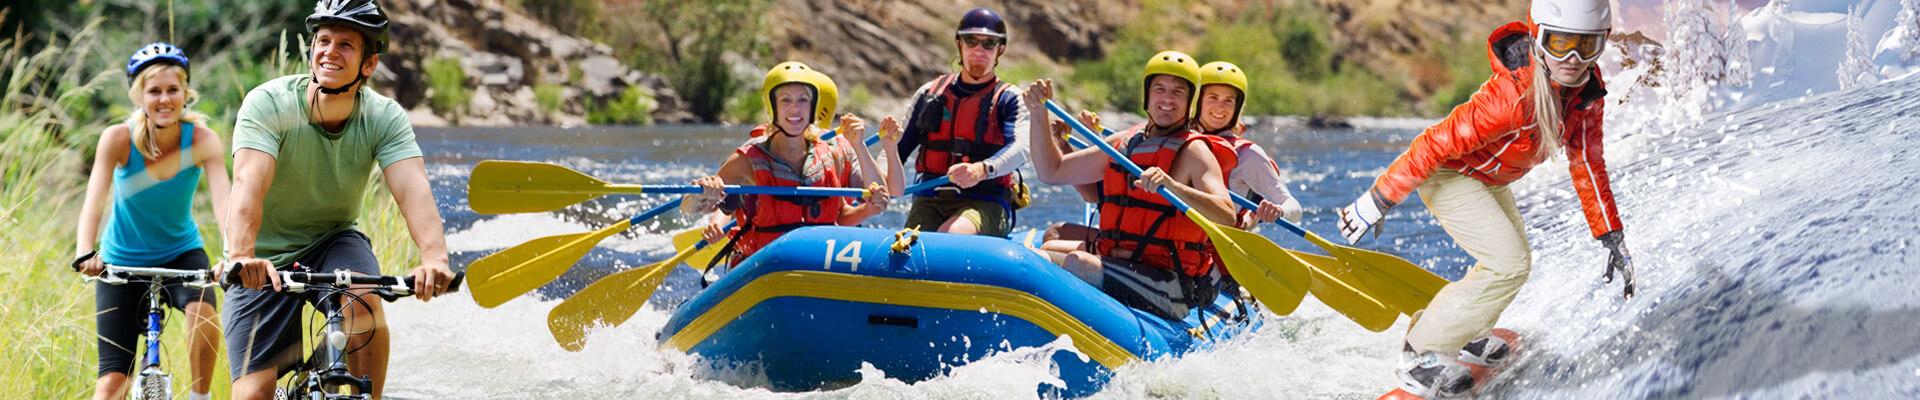 Students white water rafting down river